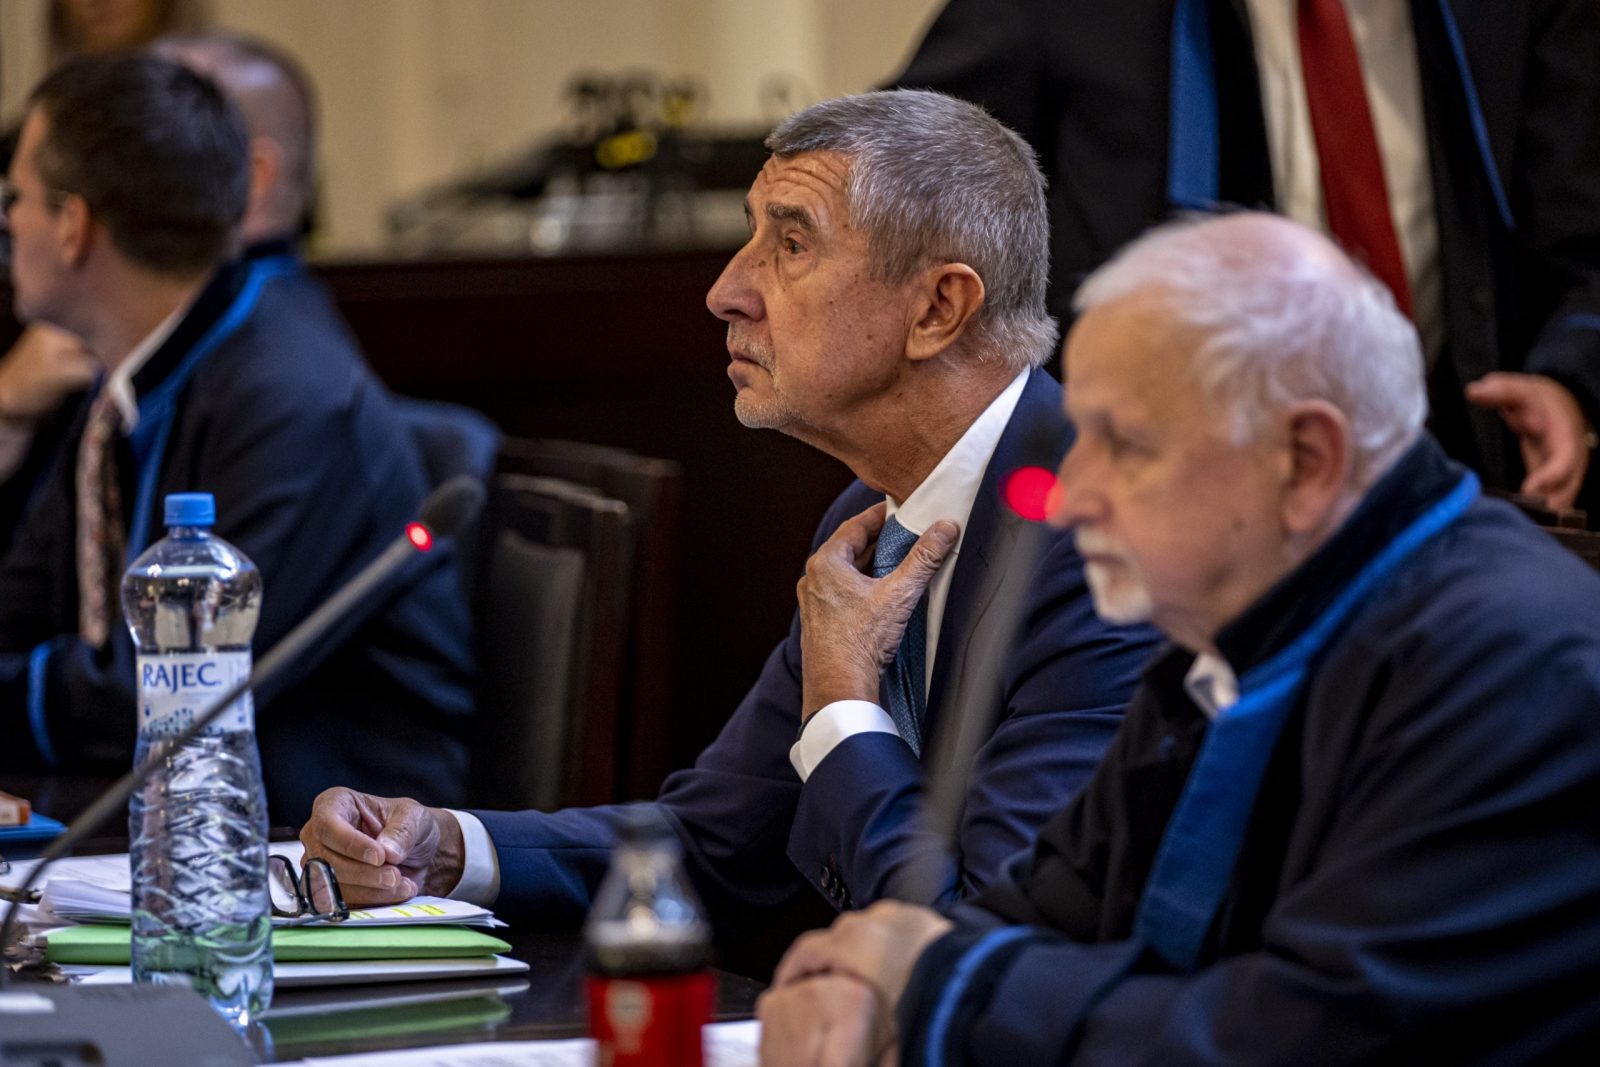 epa10179284 Czech former Prime Minister Andrej Babis (C), next to his lawyers, attends his trial at the Prague Municipal Court in Prague, Czech Republic, 12 September 2022. Babis is standing trial for alleged misuse of EU subsidies amounting to a total of 50 million Czech crowns (1.9 million euro) which were invested into the Capi Hnizdo (Stork's Nest) farm in Central Bohemia.  EPA/MARTIN DIVISEK